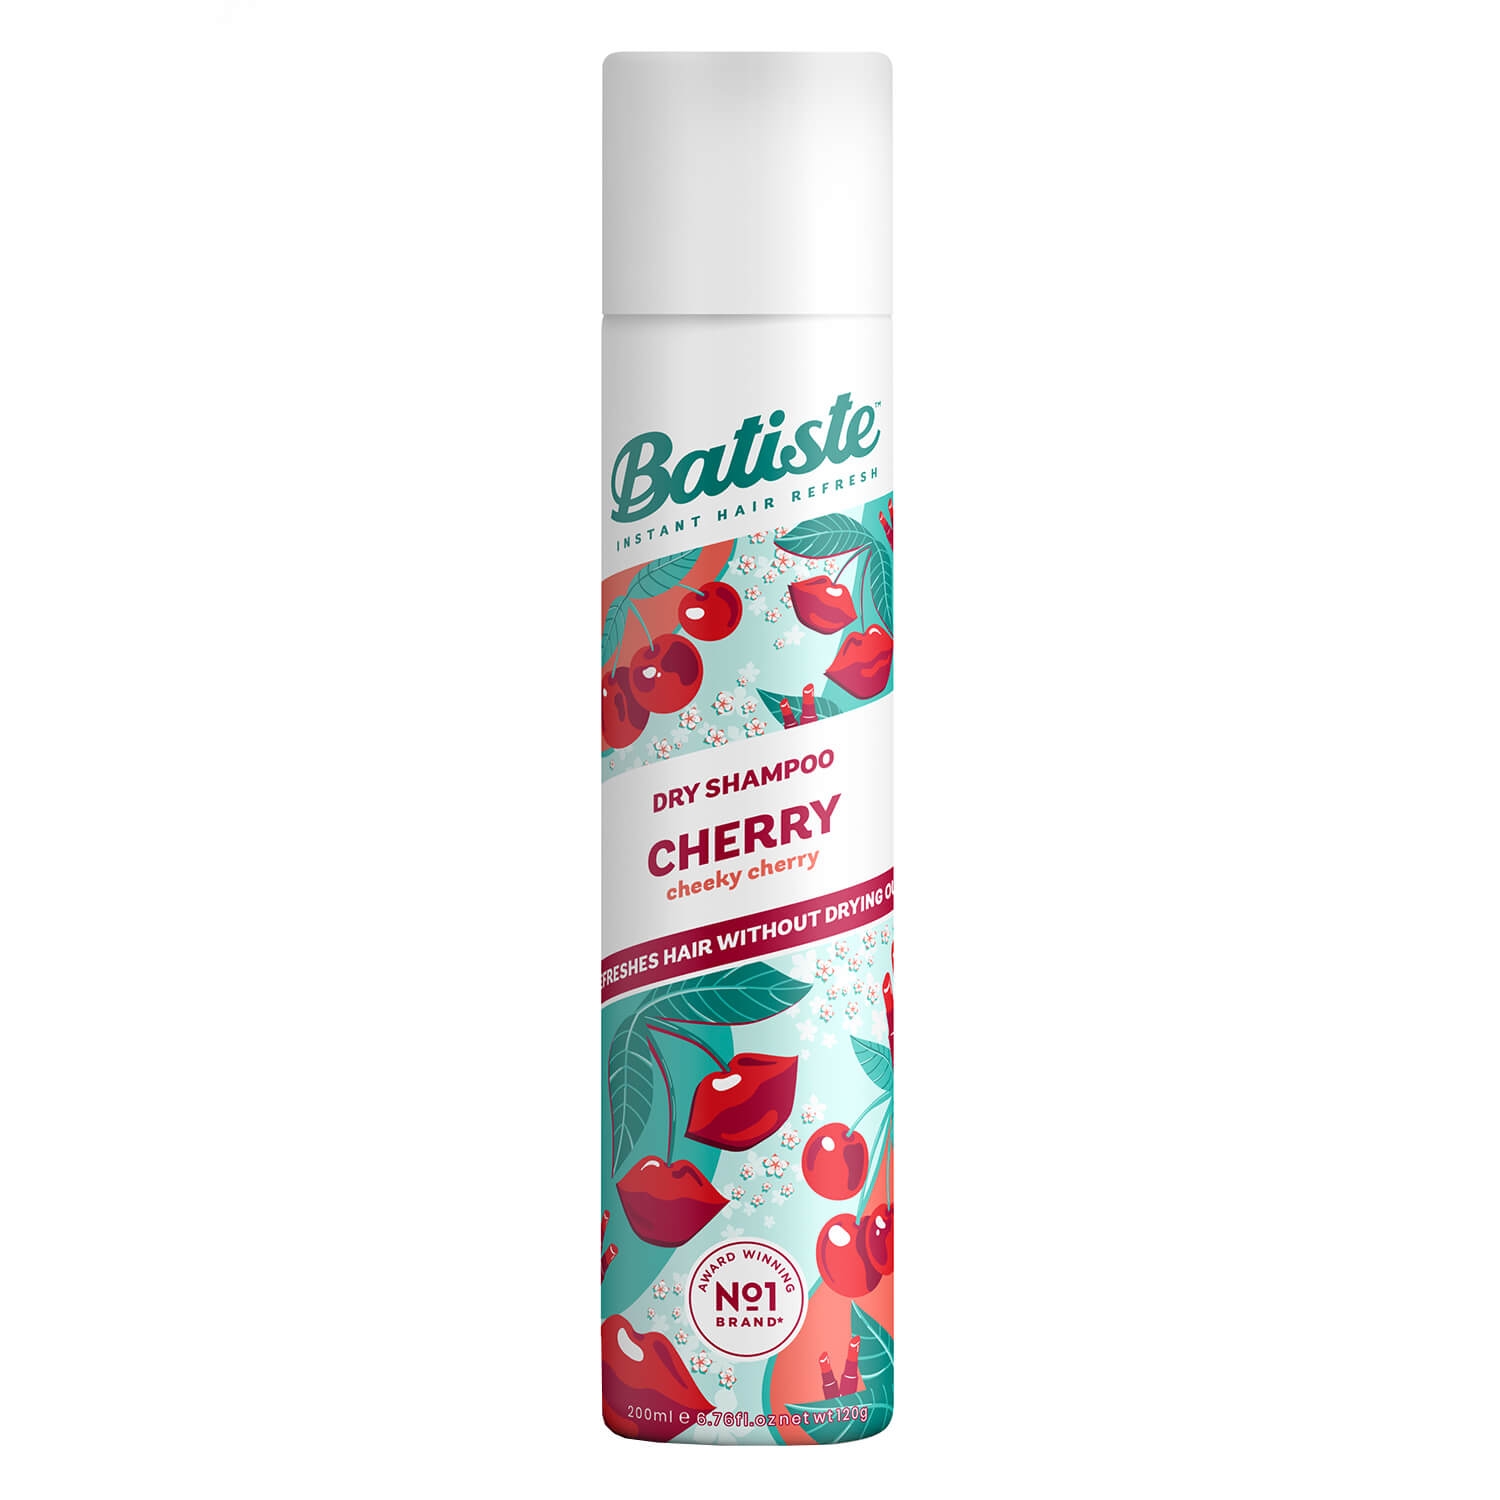 Product image from Batiste - Cherry